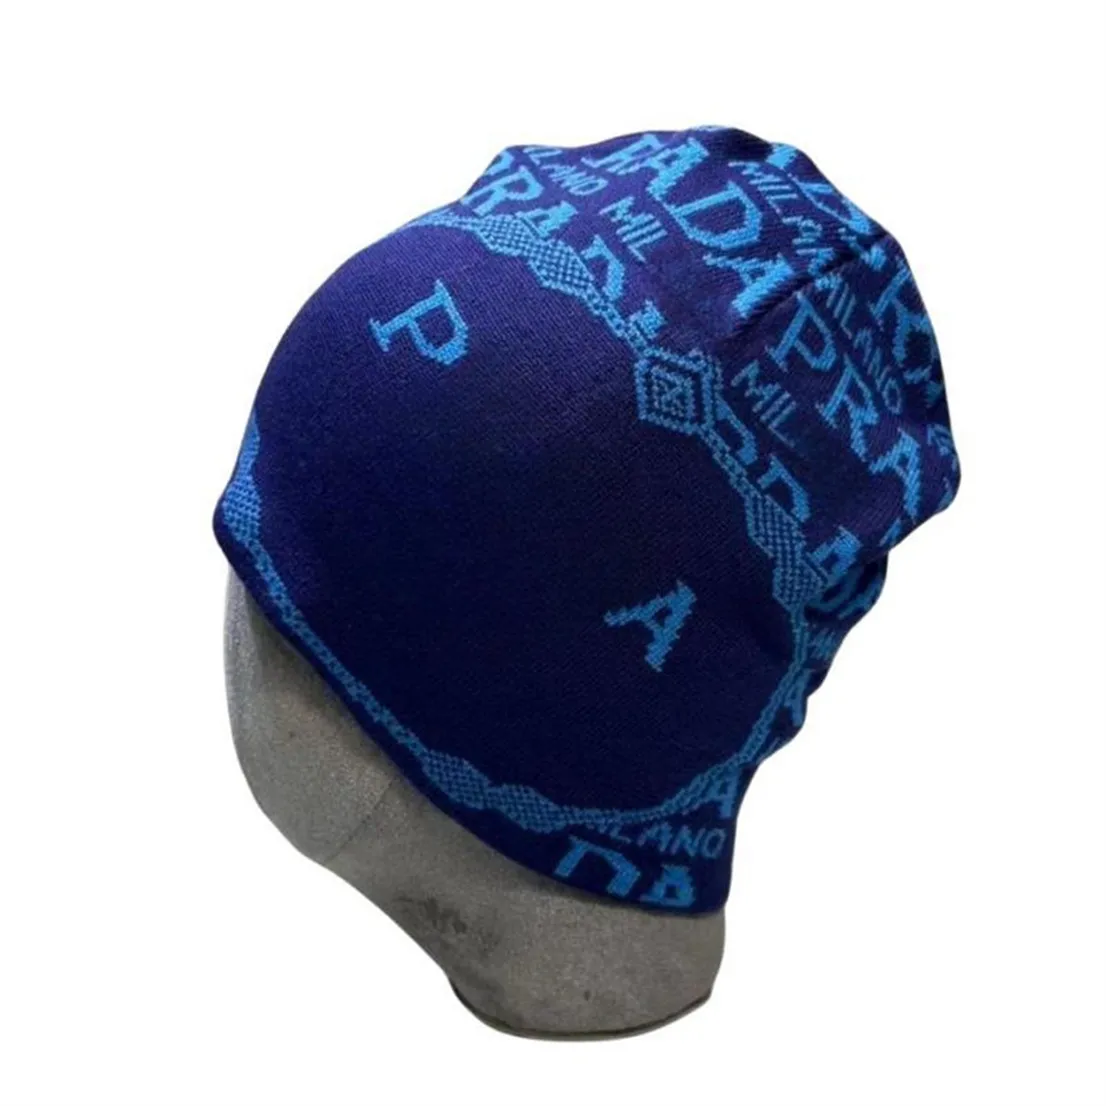 Fashion Designer hats Men's and women's beanie fall/winter thermal knit hat brand bonnet High Quality plaid Skull Hat H-15